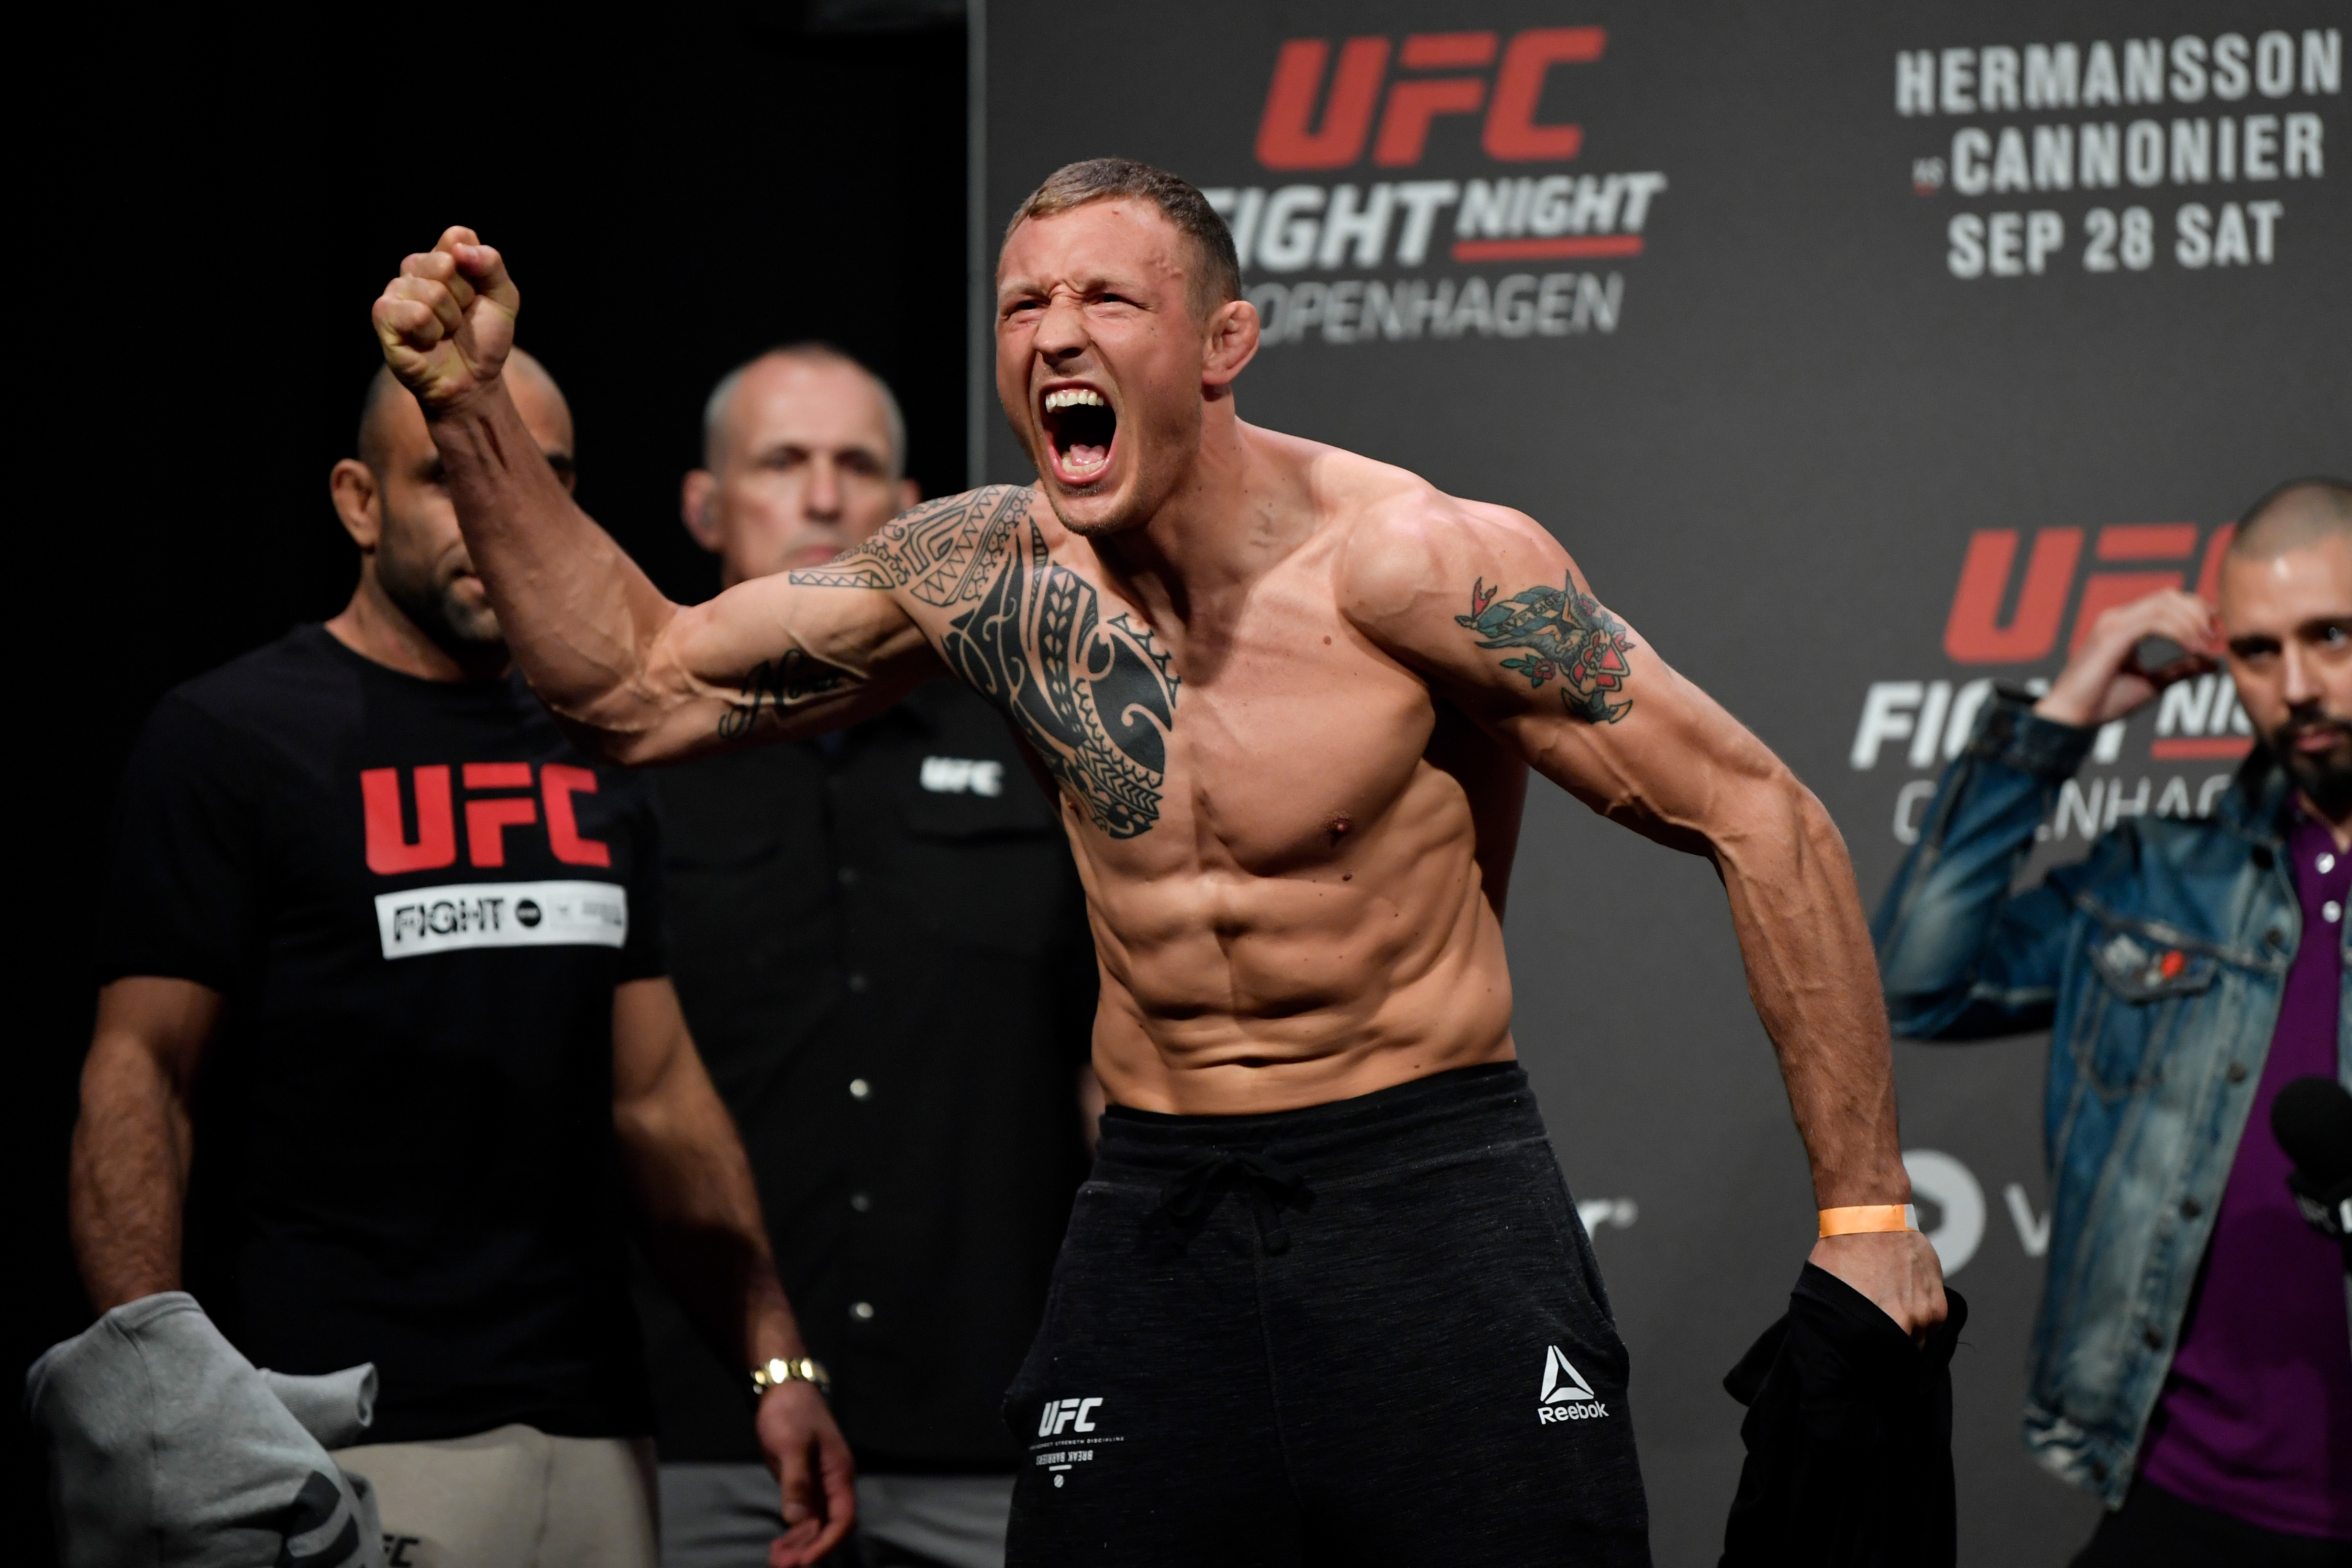 Jack Hermansson Explains the Mindset Behind His Screaming Fits Before Fights